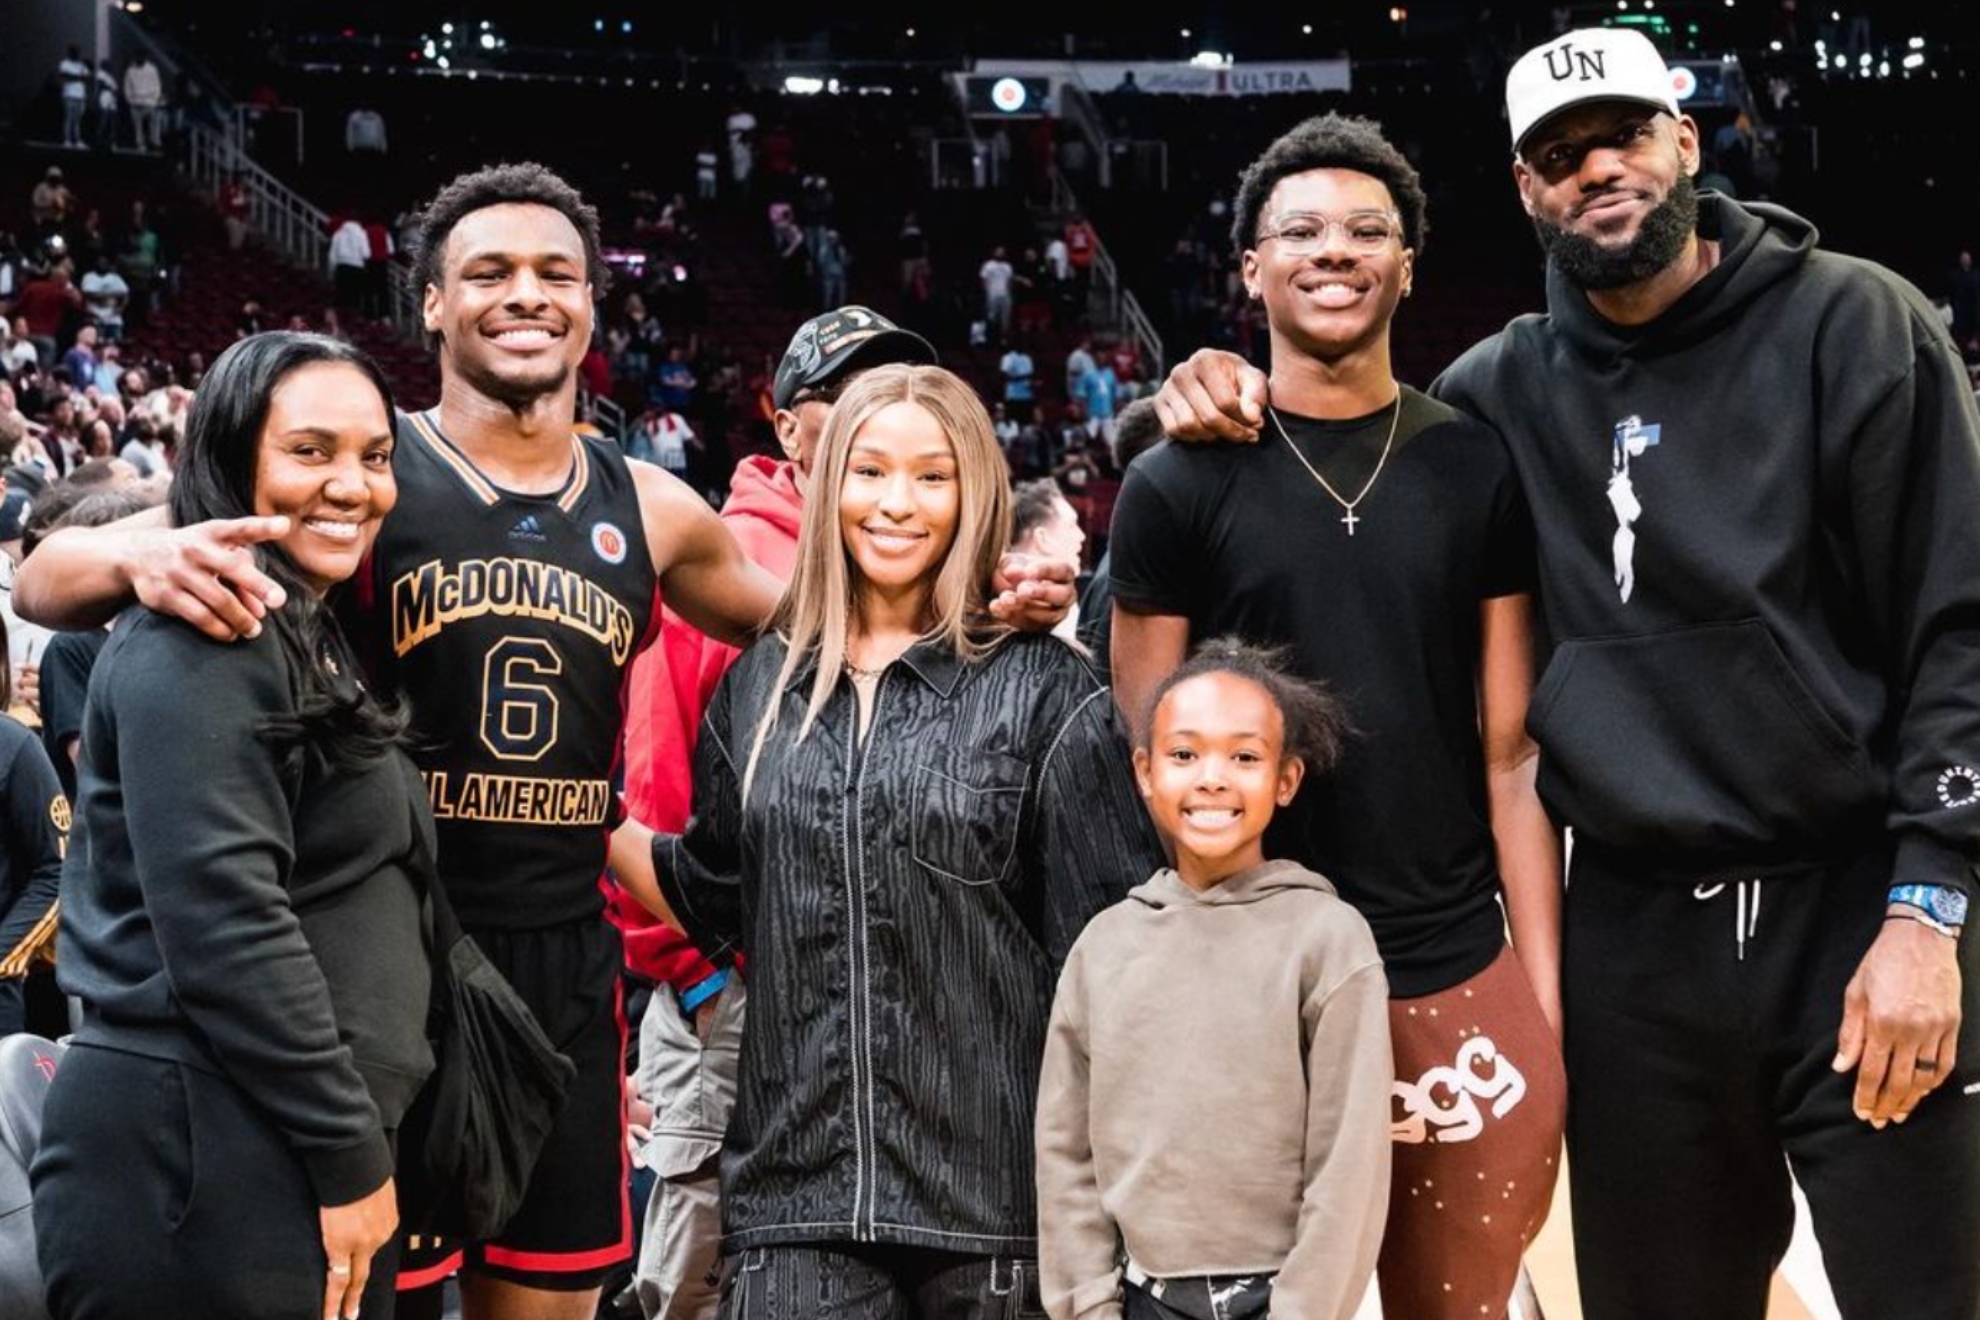 The James family at a basketball game